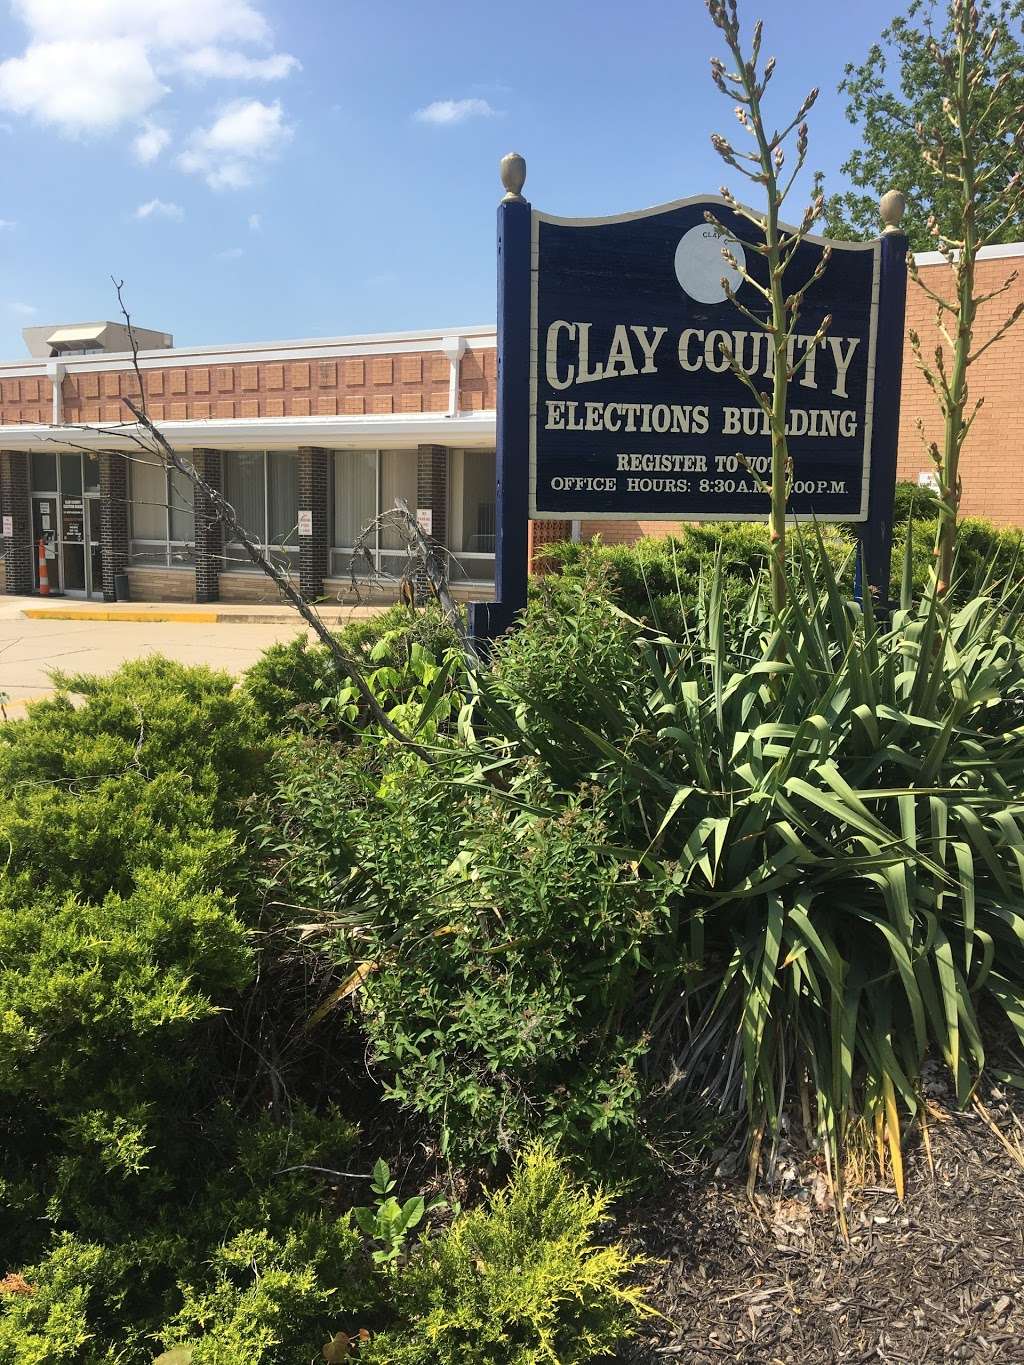 Clay County Election Board | 100 W Mississippi St, Liberty, MO 64068 | Phone: (816) 415-8683